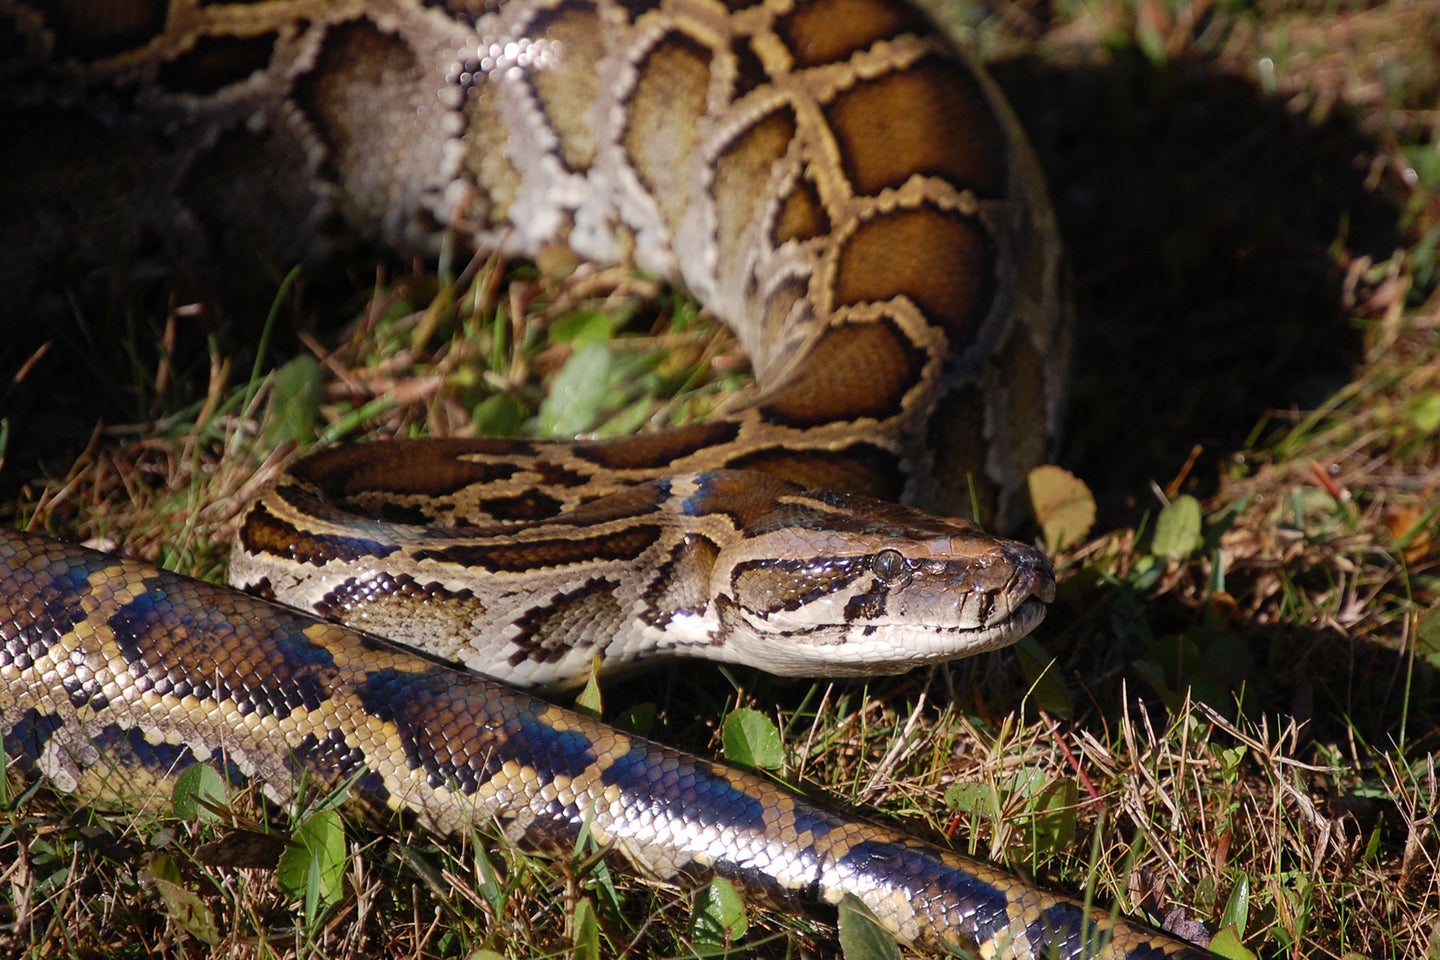 Invasive Burmese pythons have decimated some species of fur-bearing animals in the Everglades and completely eradicated others.